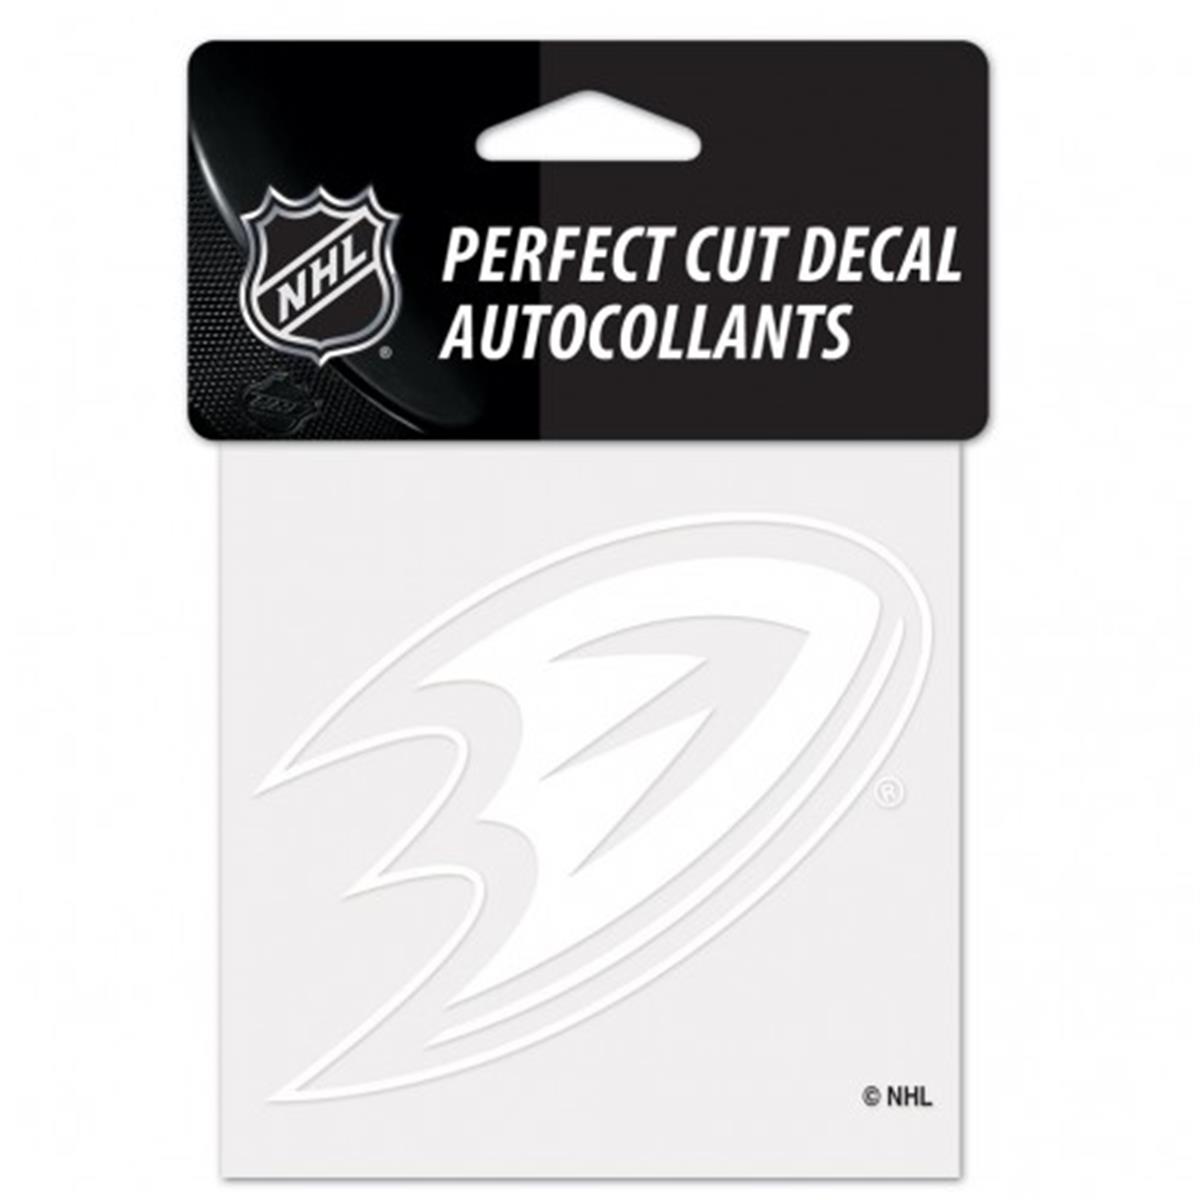 Picture of Anaheim Ducks Decal 4x4 Perfect Cut White Special Order